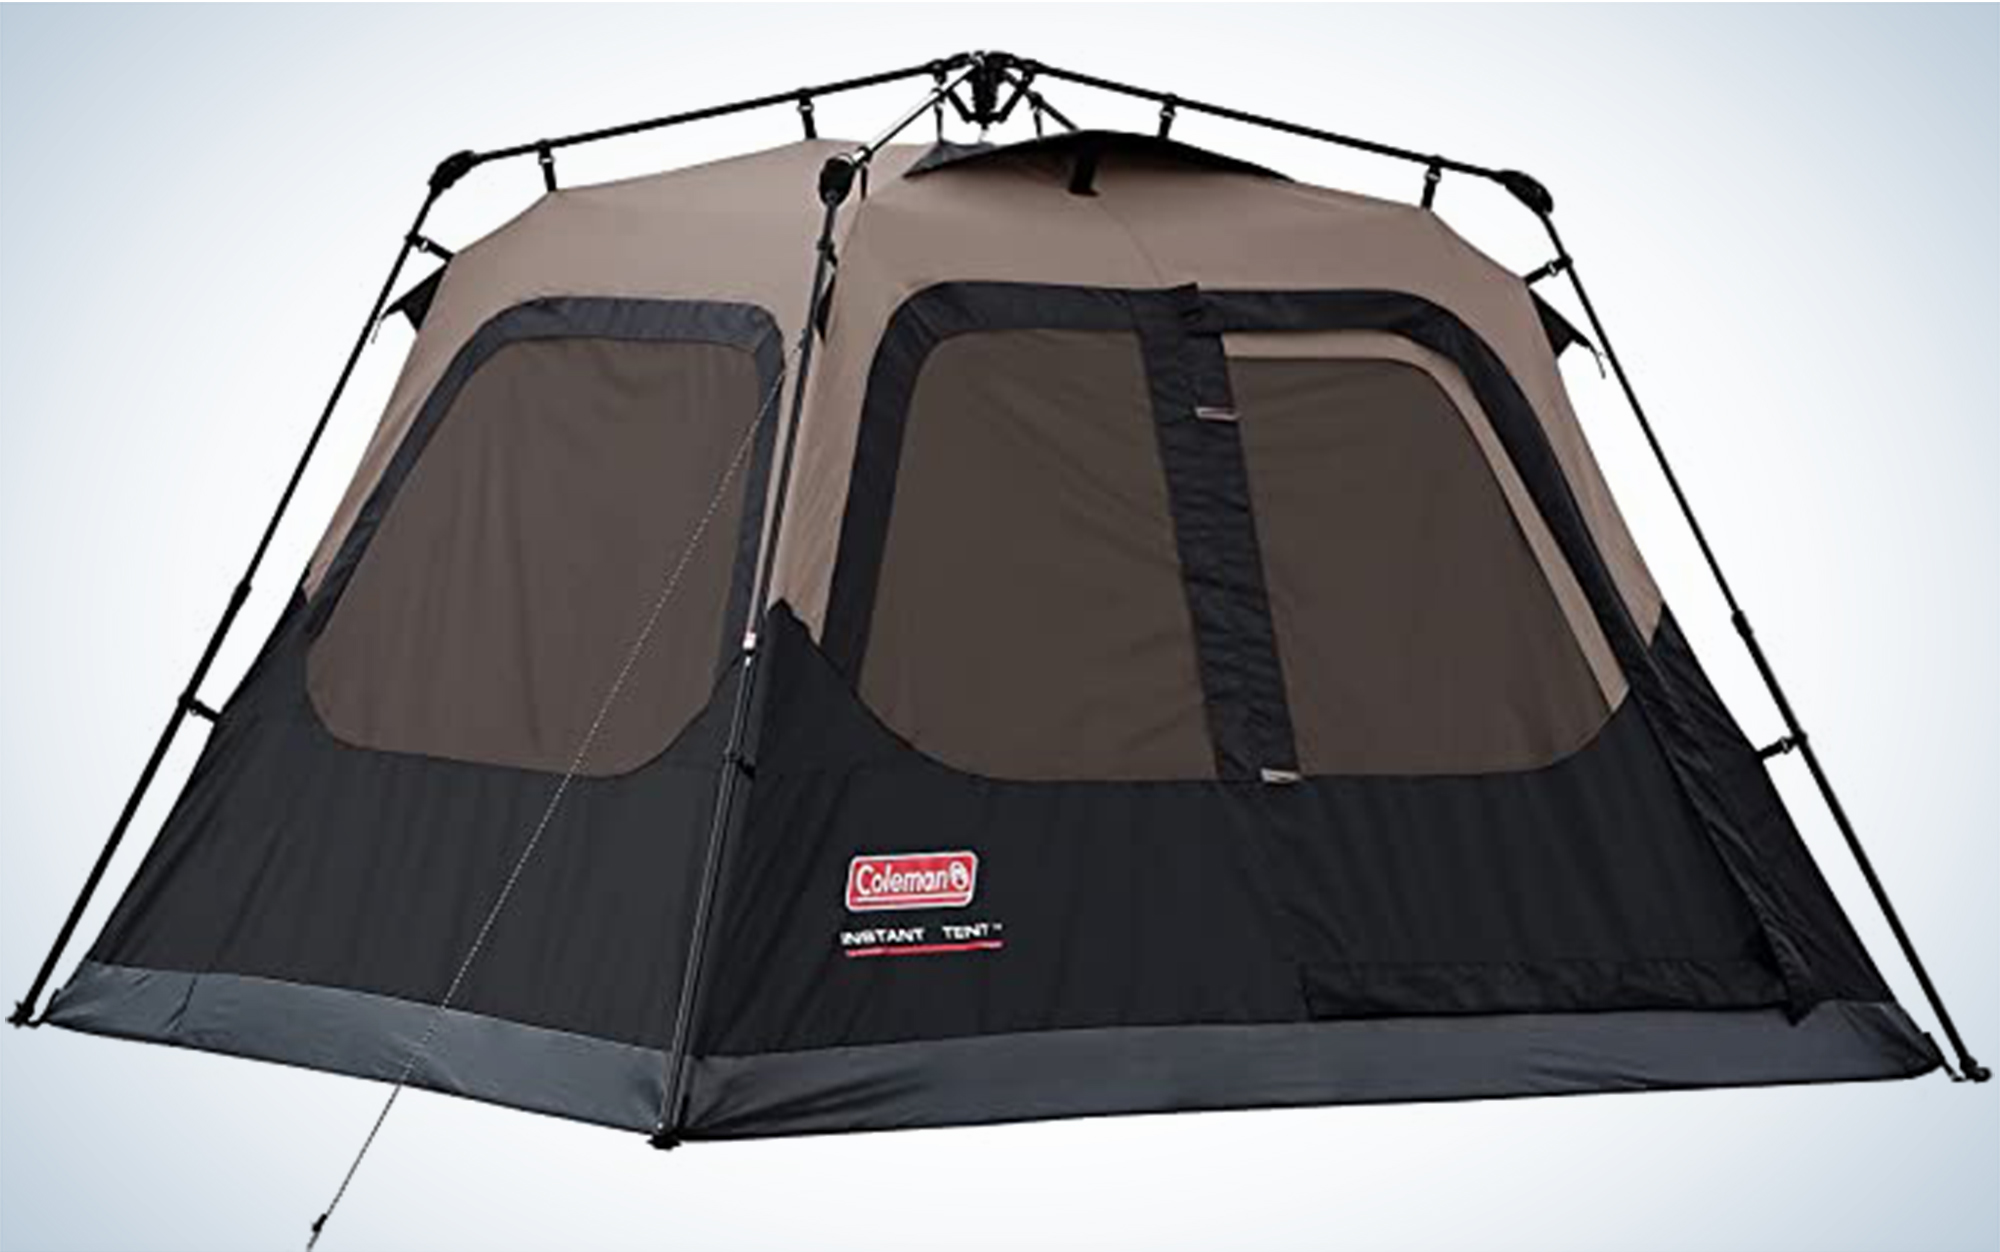 We found the best tent deals on Amazon.